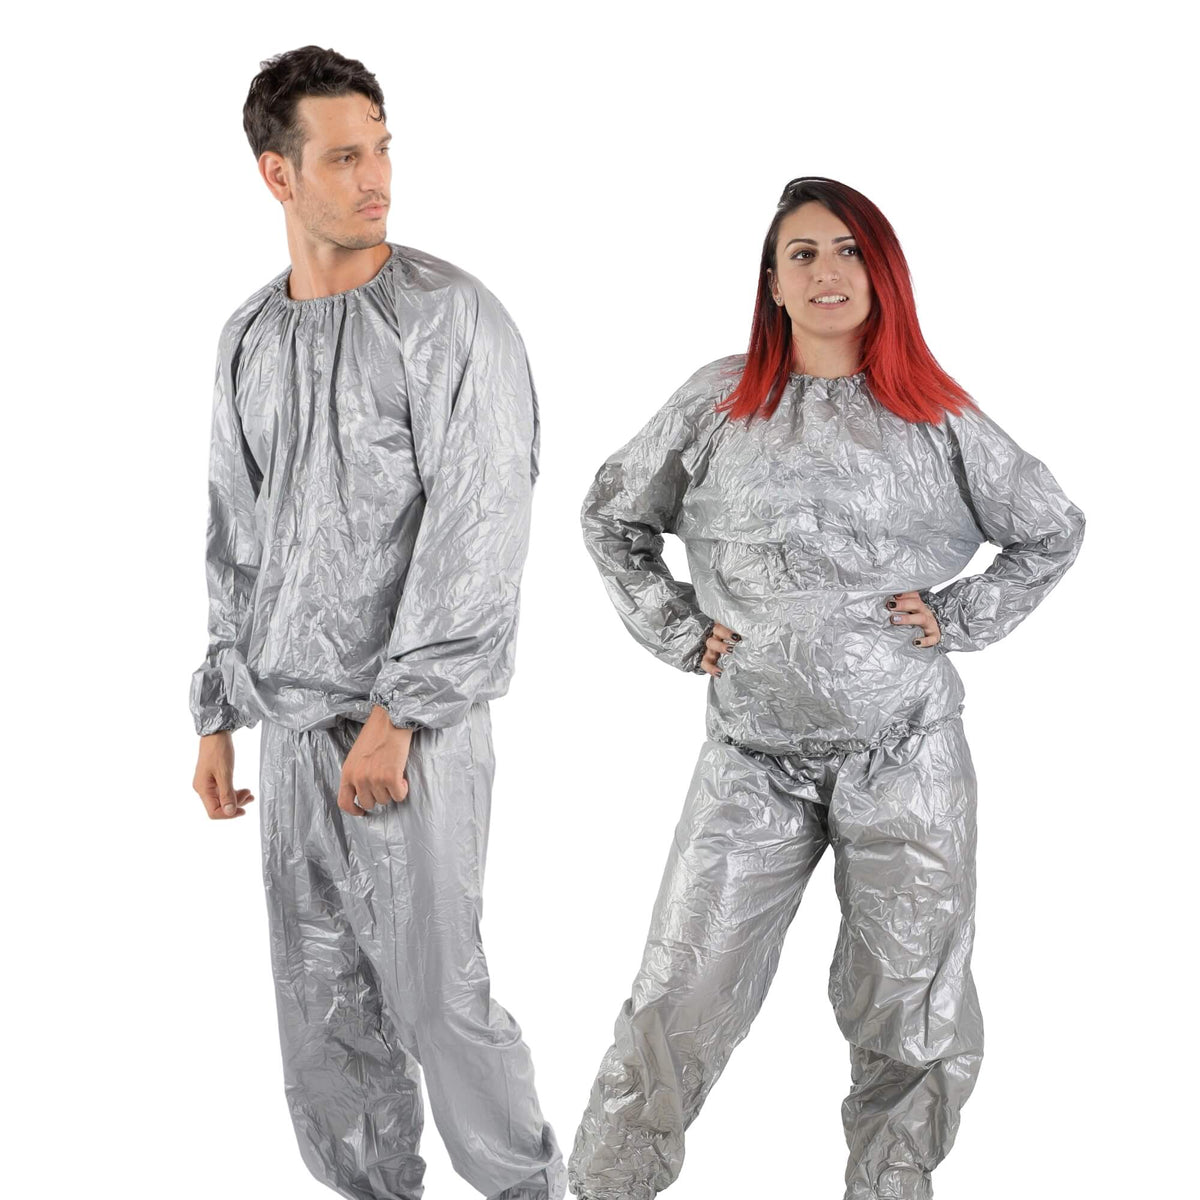 Rock the Kewlioo Pro Sauna Suit for Men and turn up the heat on